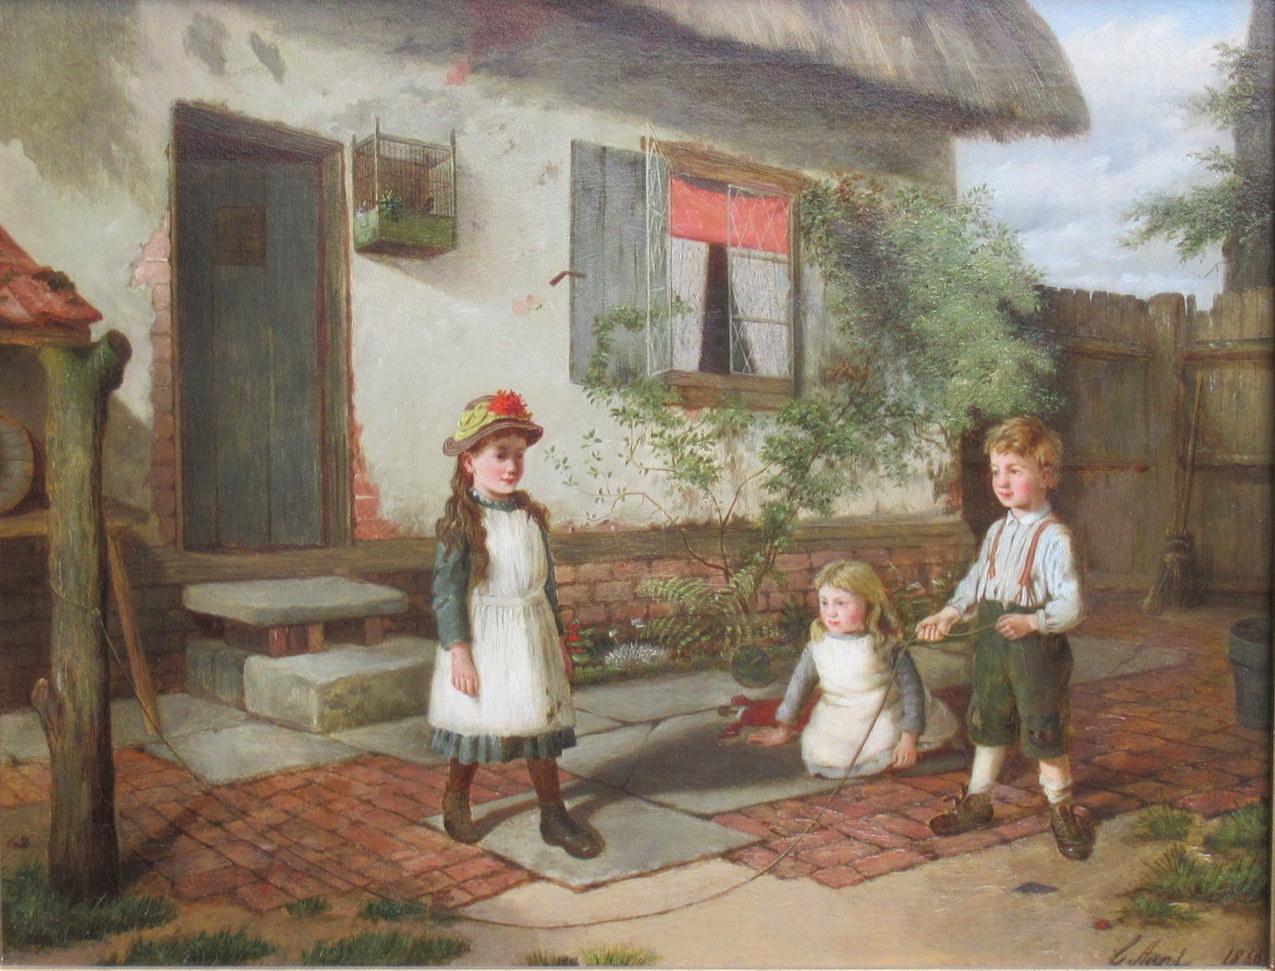 Charming oil on canvas by Charles Hunt typical of his work where he specialized in light hearted studies of Children in rural English settings. Titled “The Halfway House” 

This vintage view depicts three children playing outside a thatched